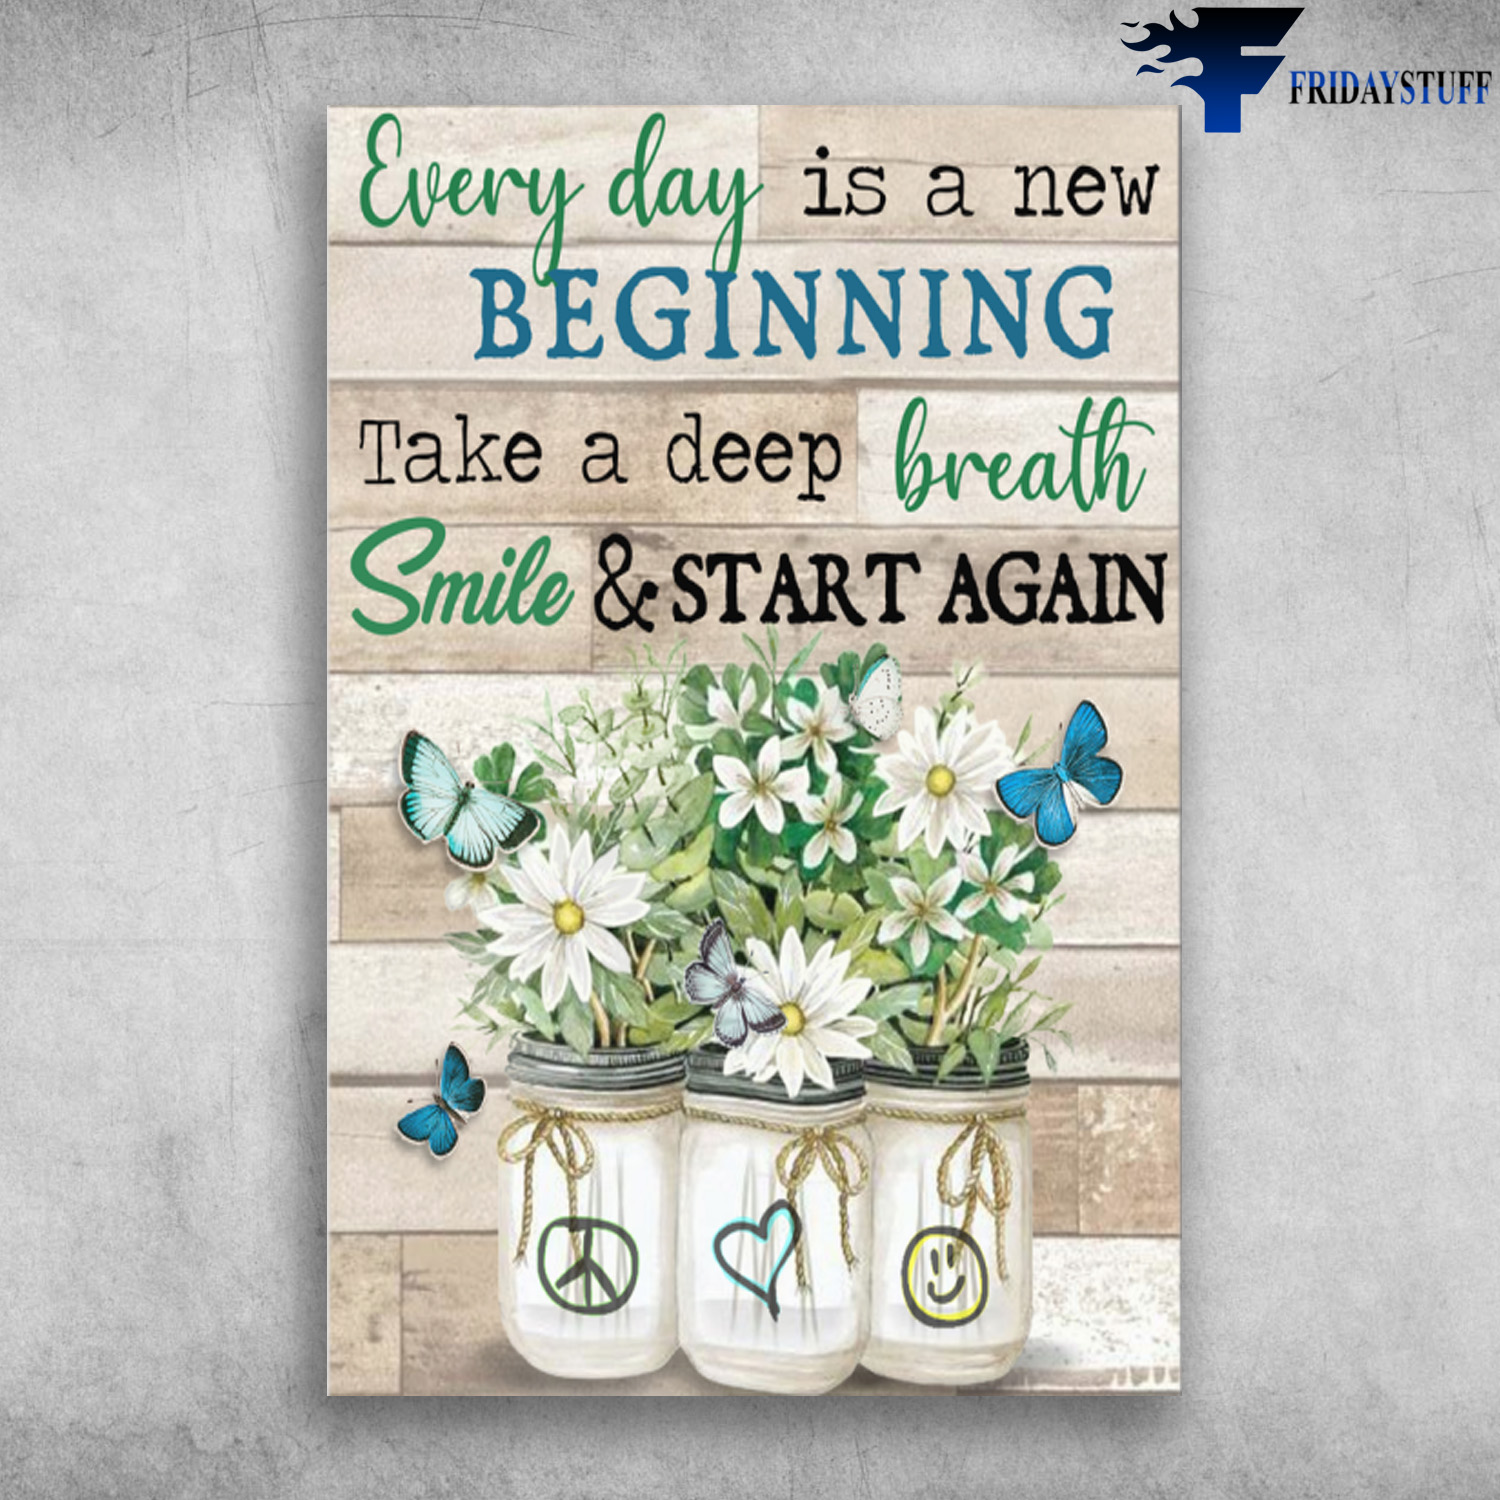 Vases Of Flowers And Butterflies - Everyday Is A New Beginning Take A Deep Breath Smile & Start Again